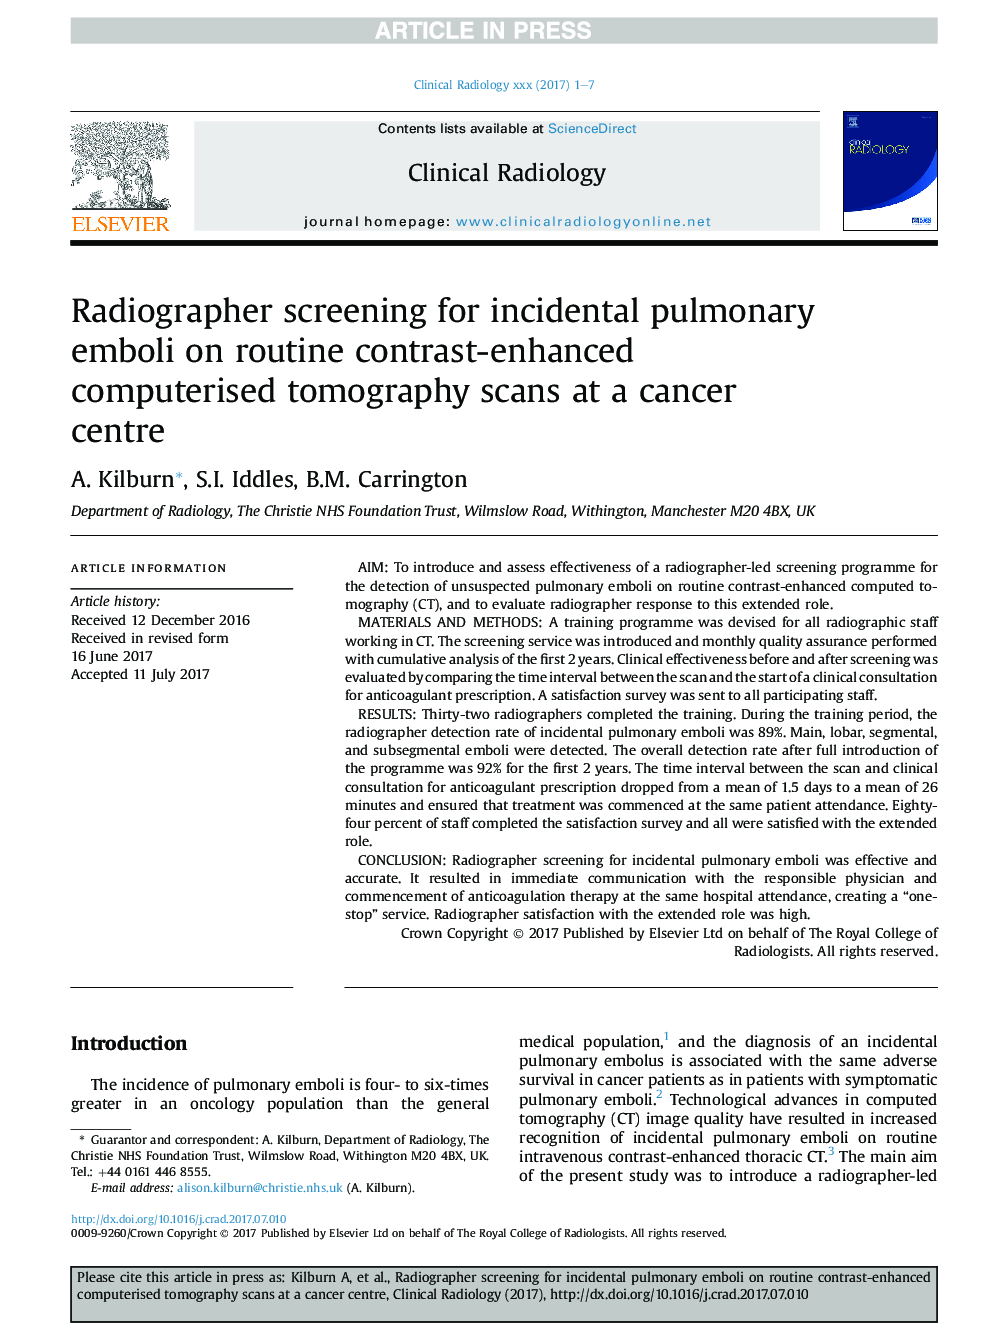 Radiographer screening for incidental pulmonary emboli on routine contrast-enhanced computerised tomography scans at a cancer centre